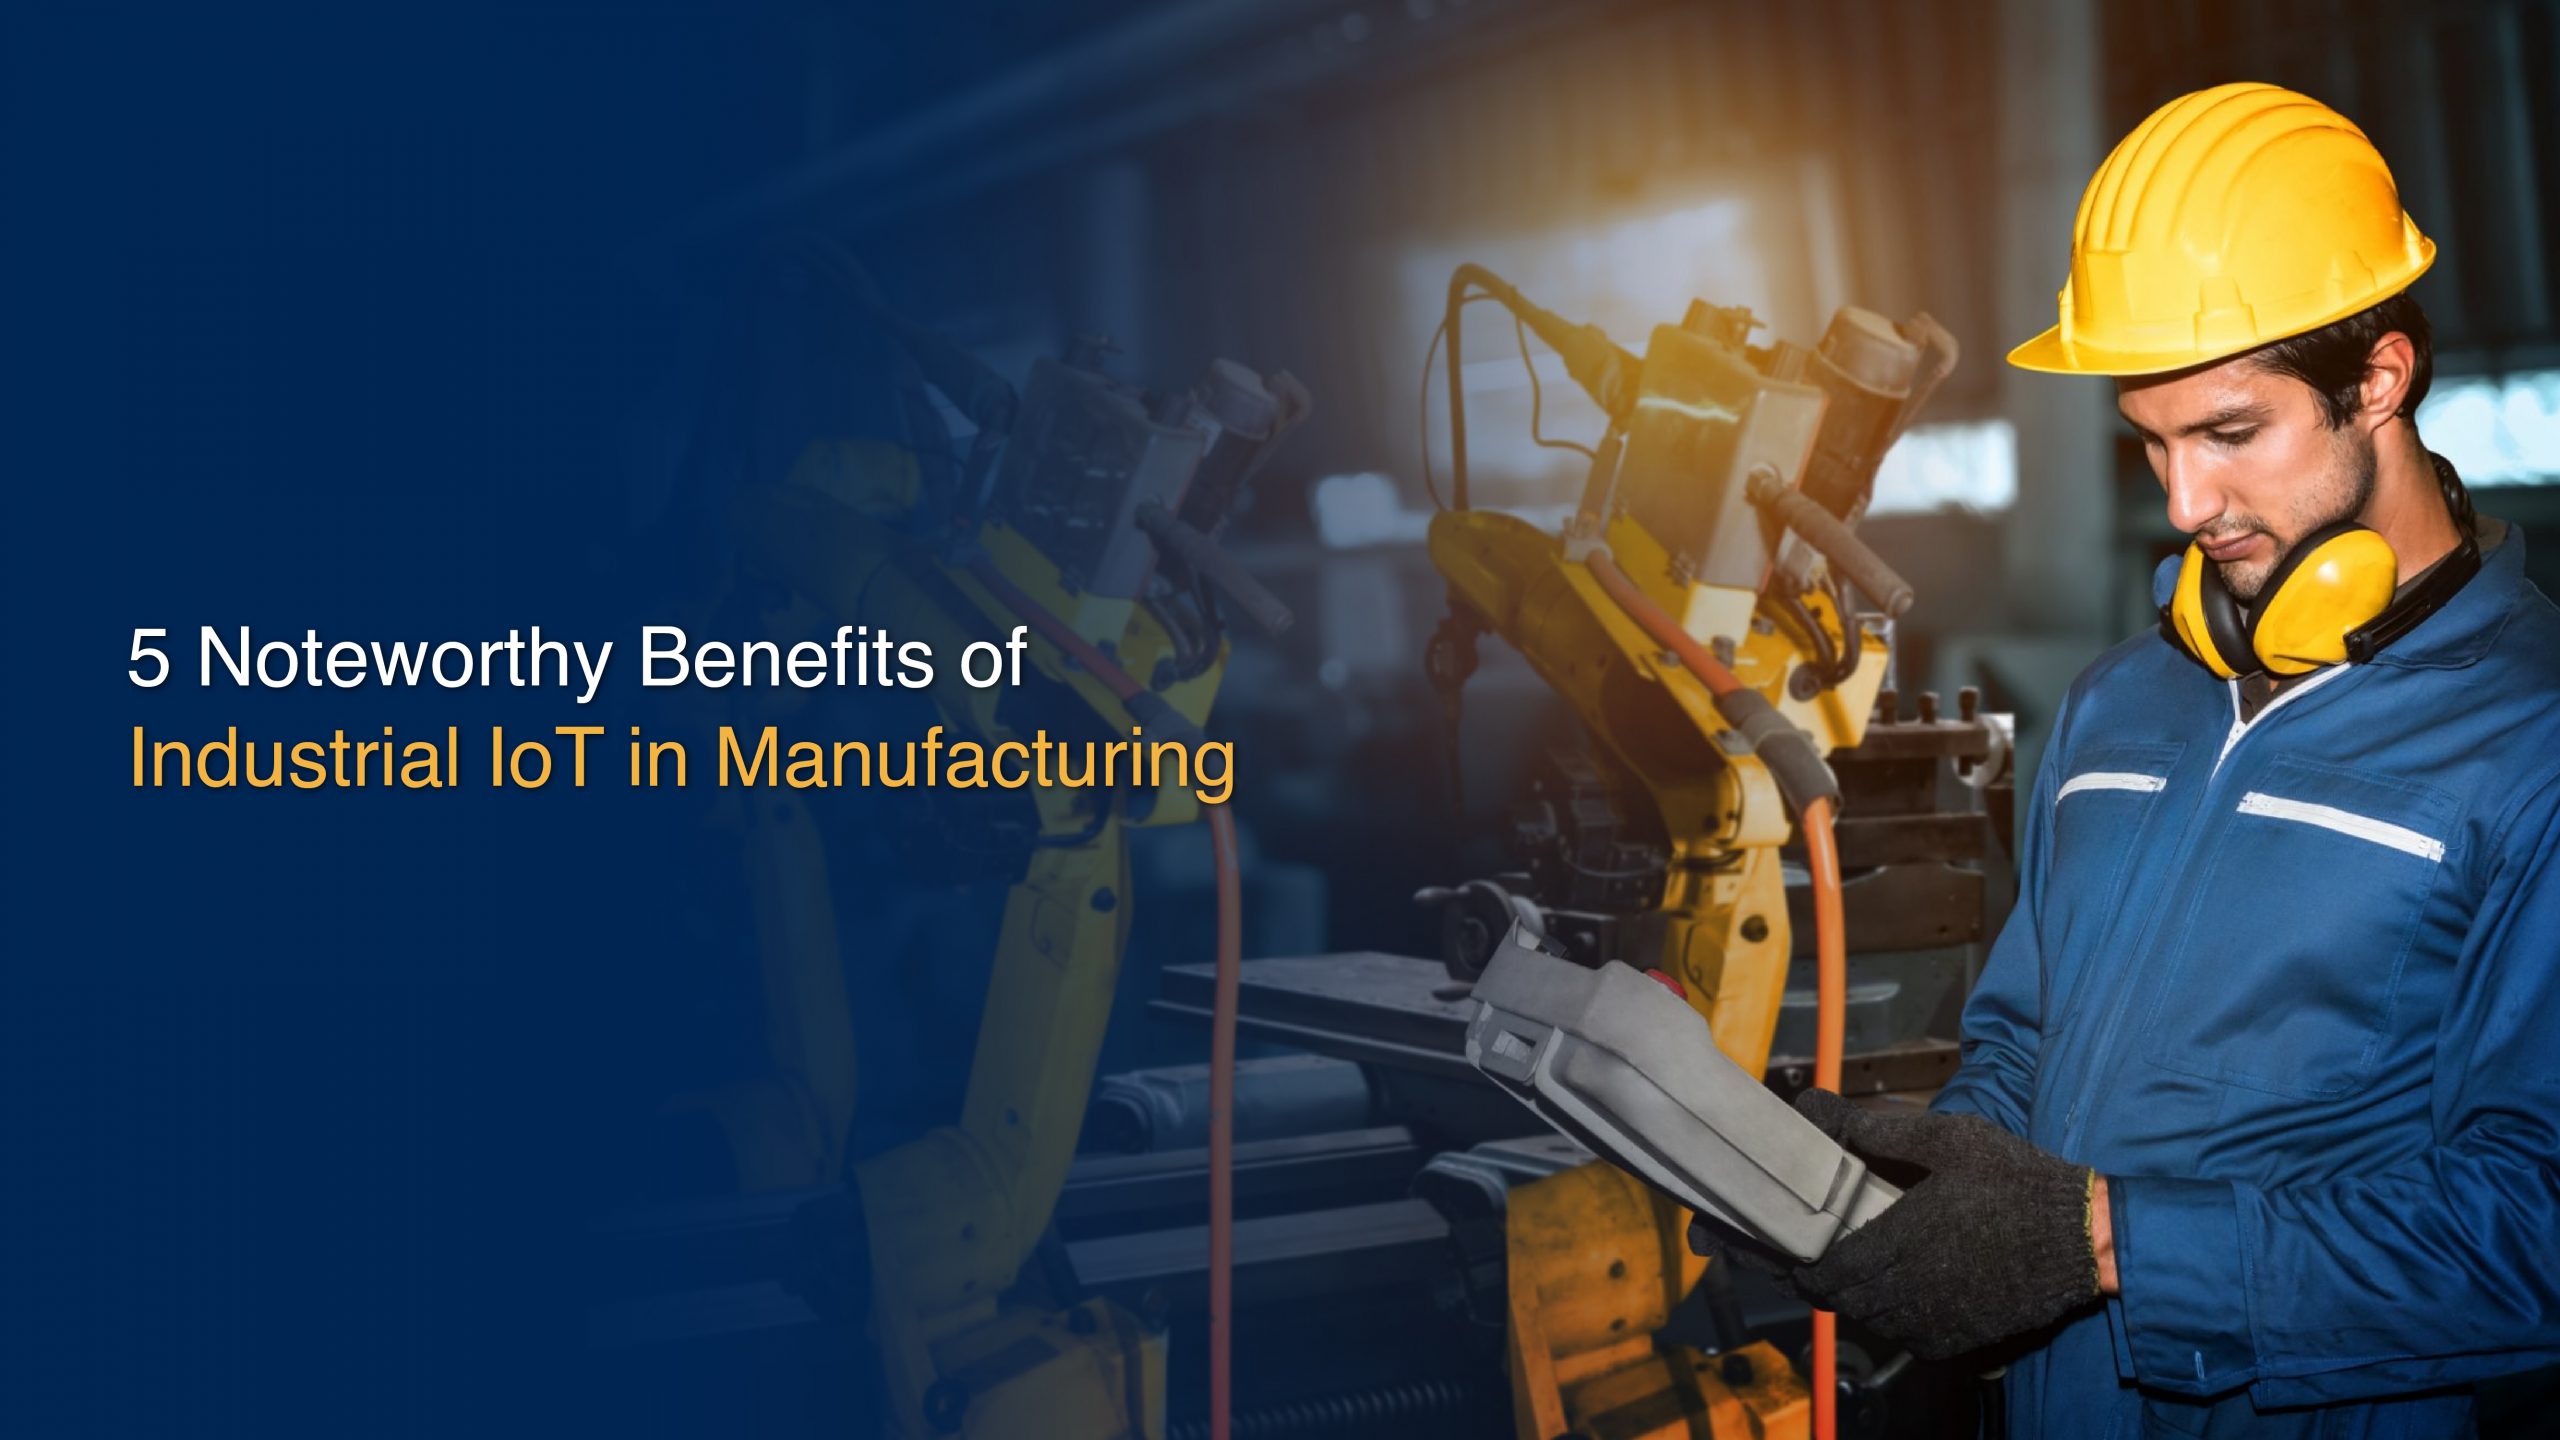 5 Noteworthy Benefits of Industrial IoT in Manufacturing